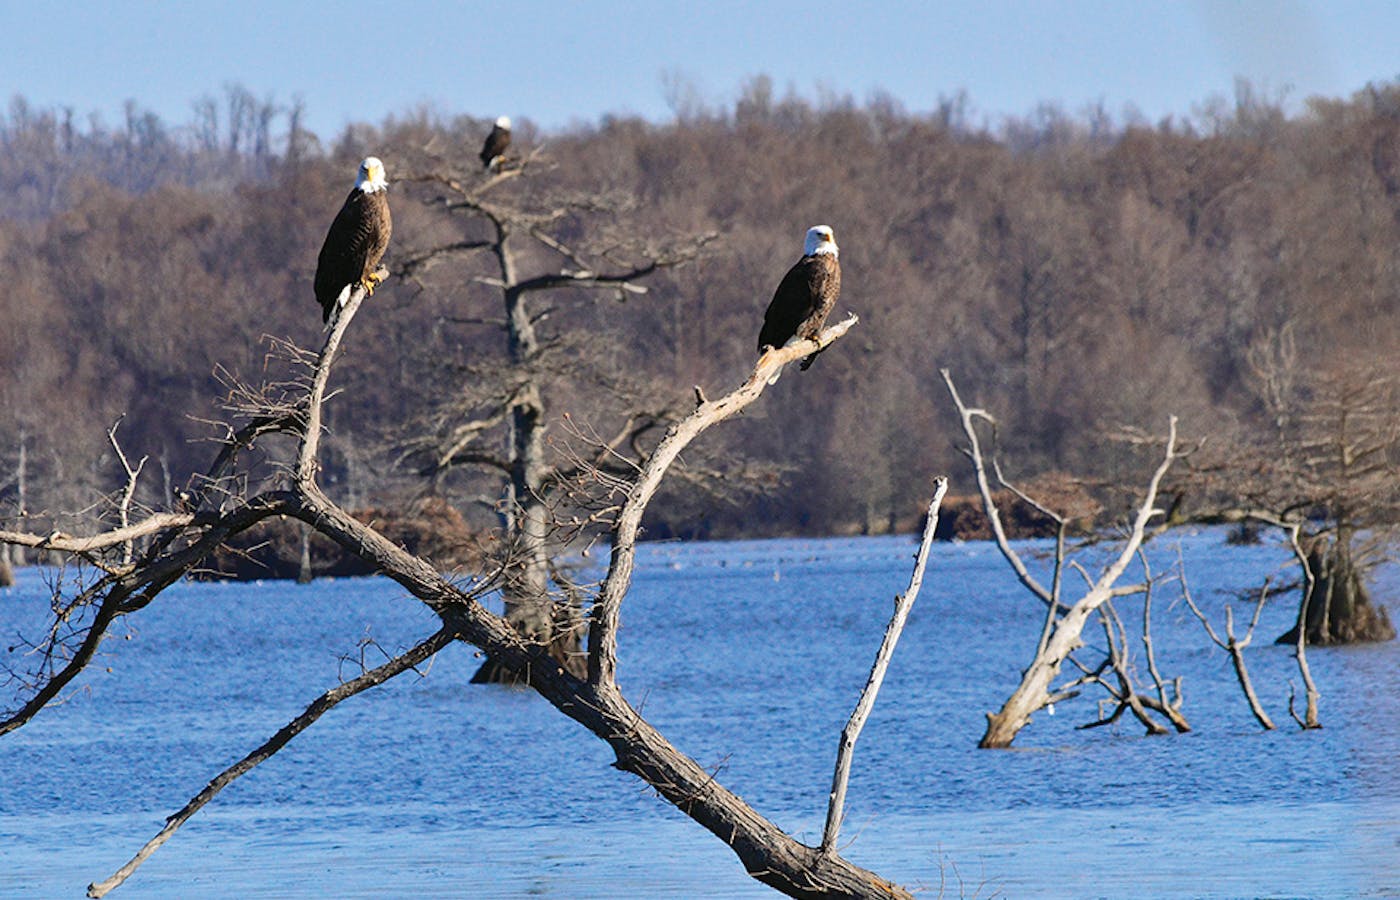 Three eagles on branches at Reelfoot Lake in Tiptonville, Tennessee (photo by David Haggard)